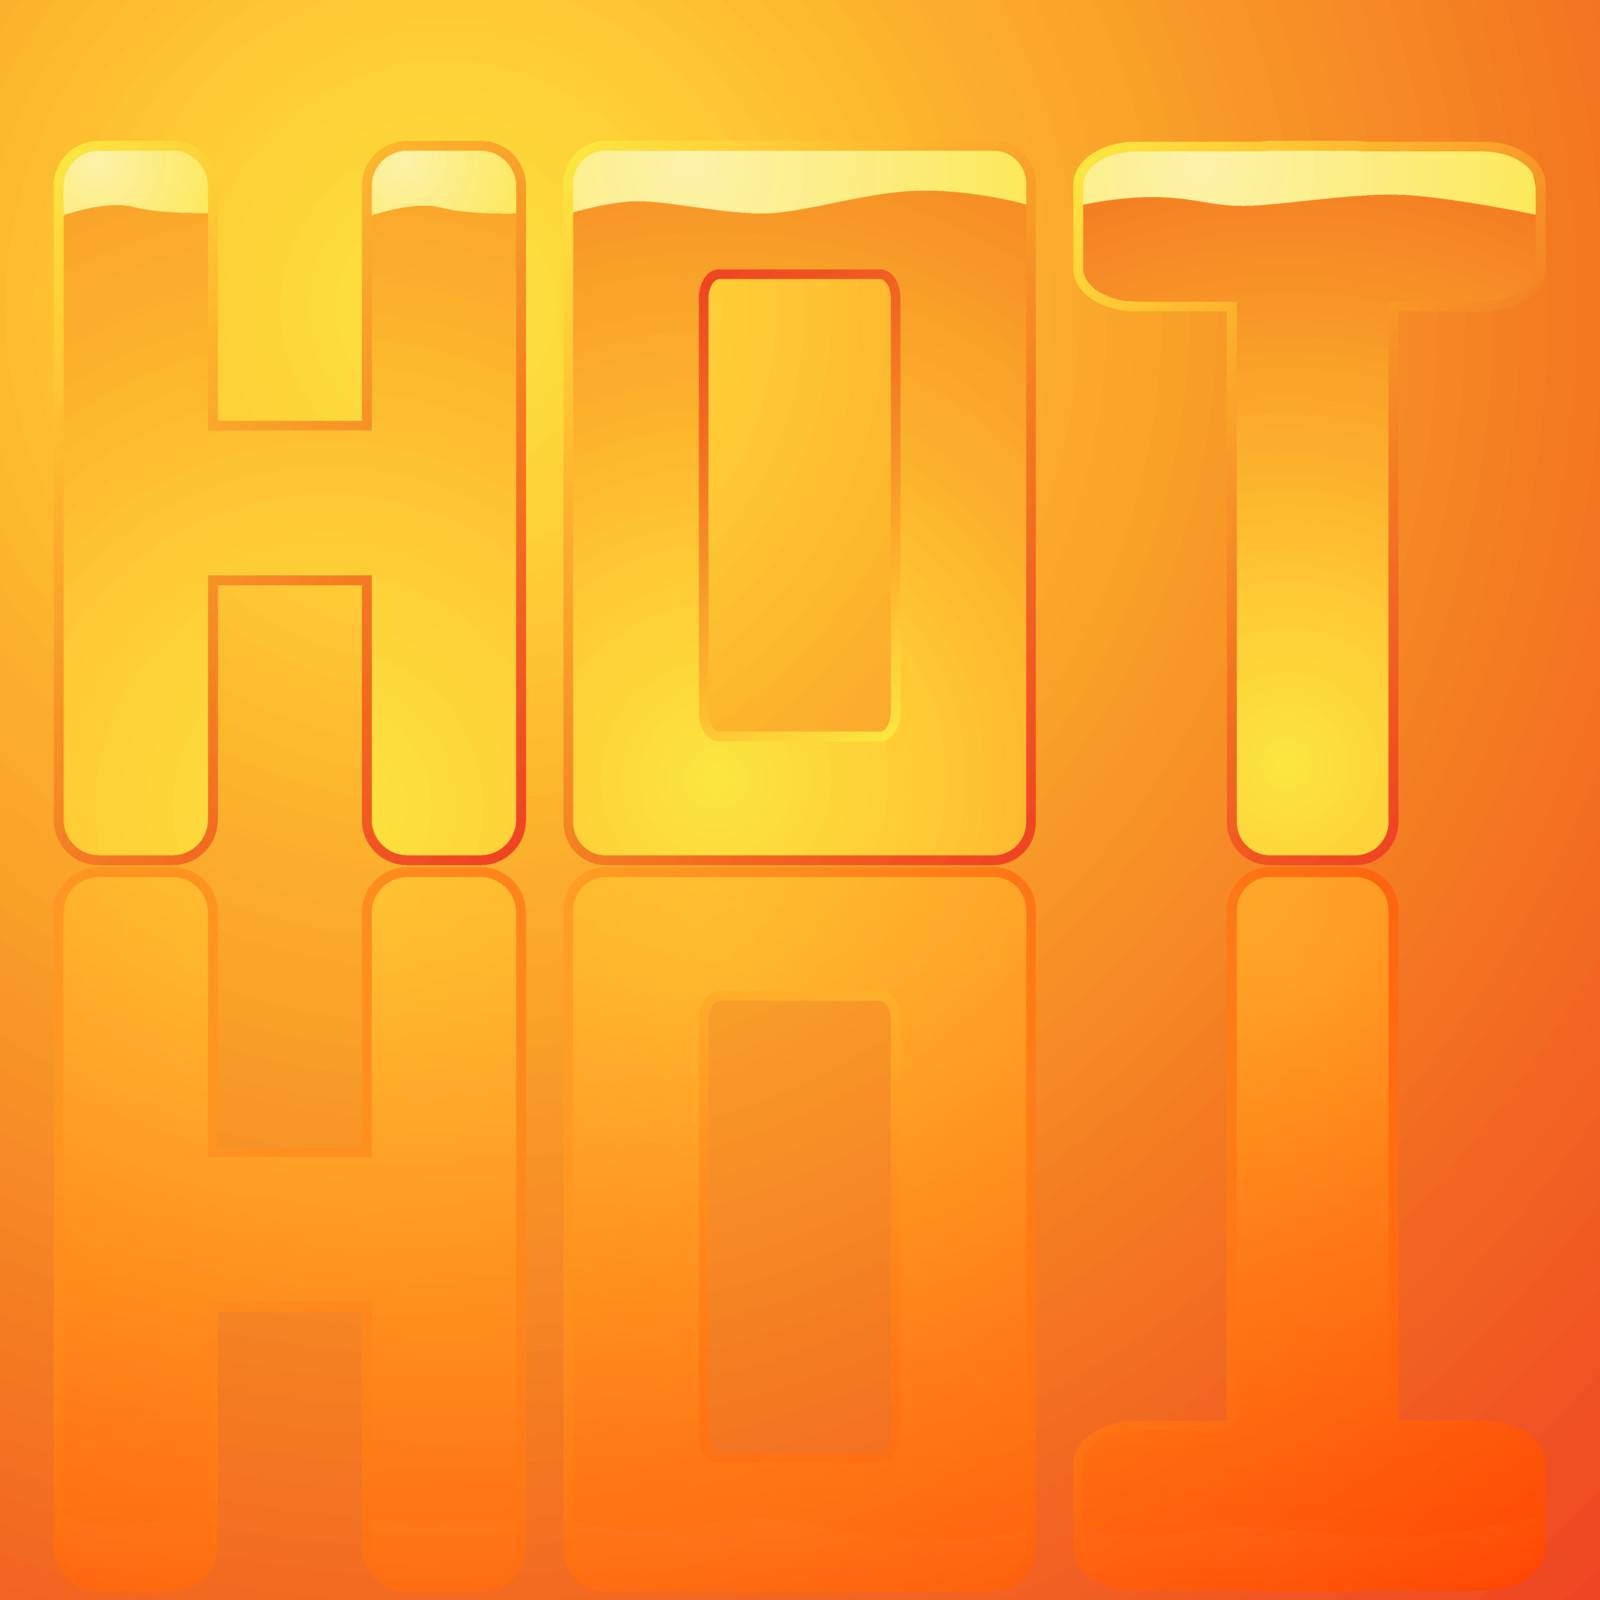 Glossy illustration of the word hot represented by different tones of orange and yellow